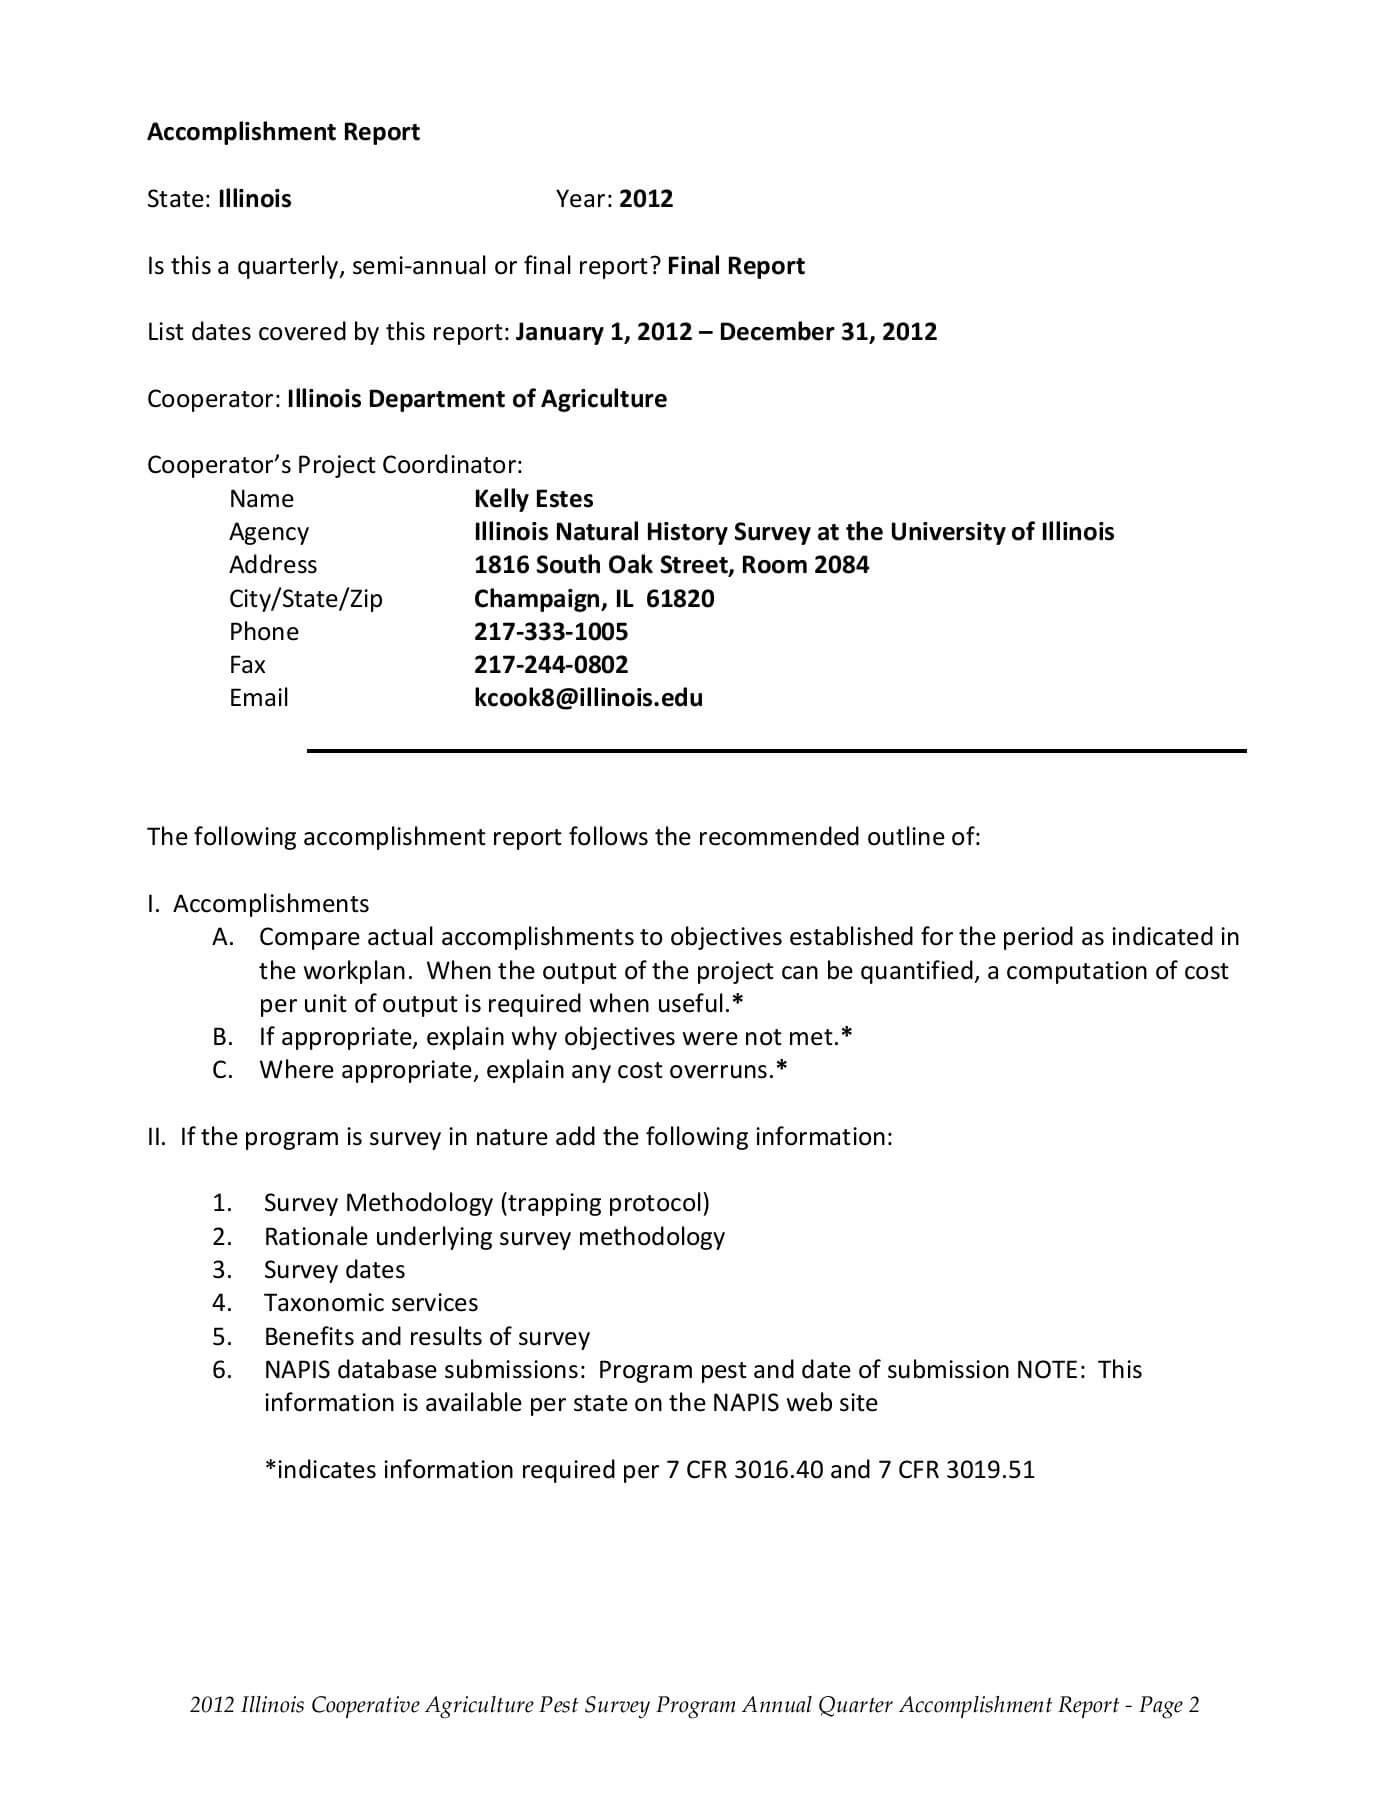 Accomplishment Report Format – Illinois Natural History Survy Pertaining To Weekly Accomplishment Report Template